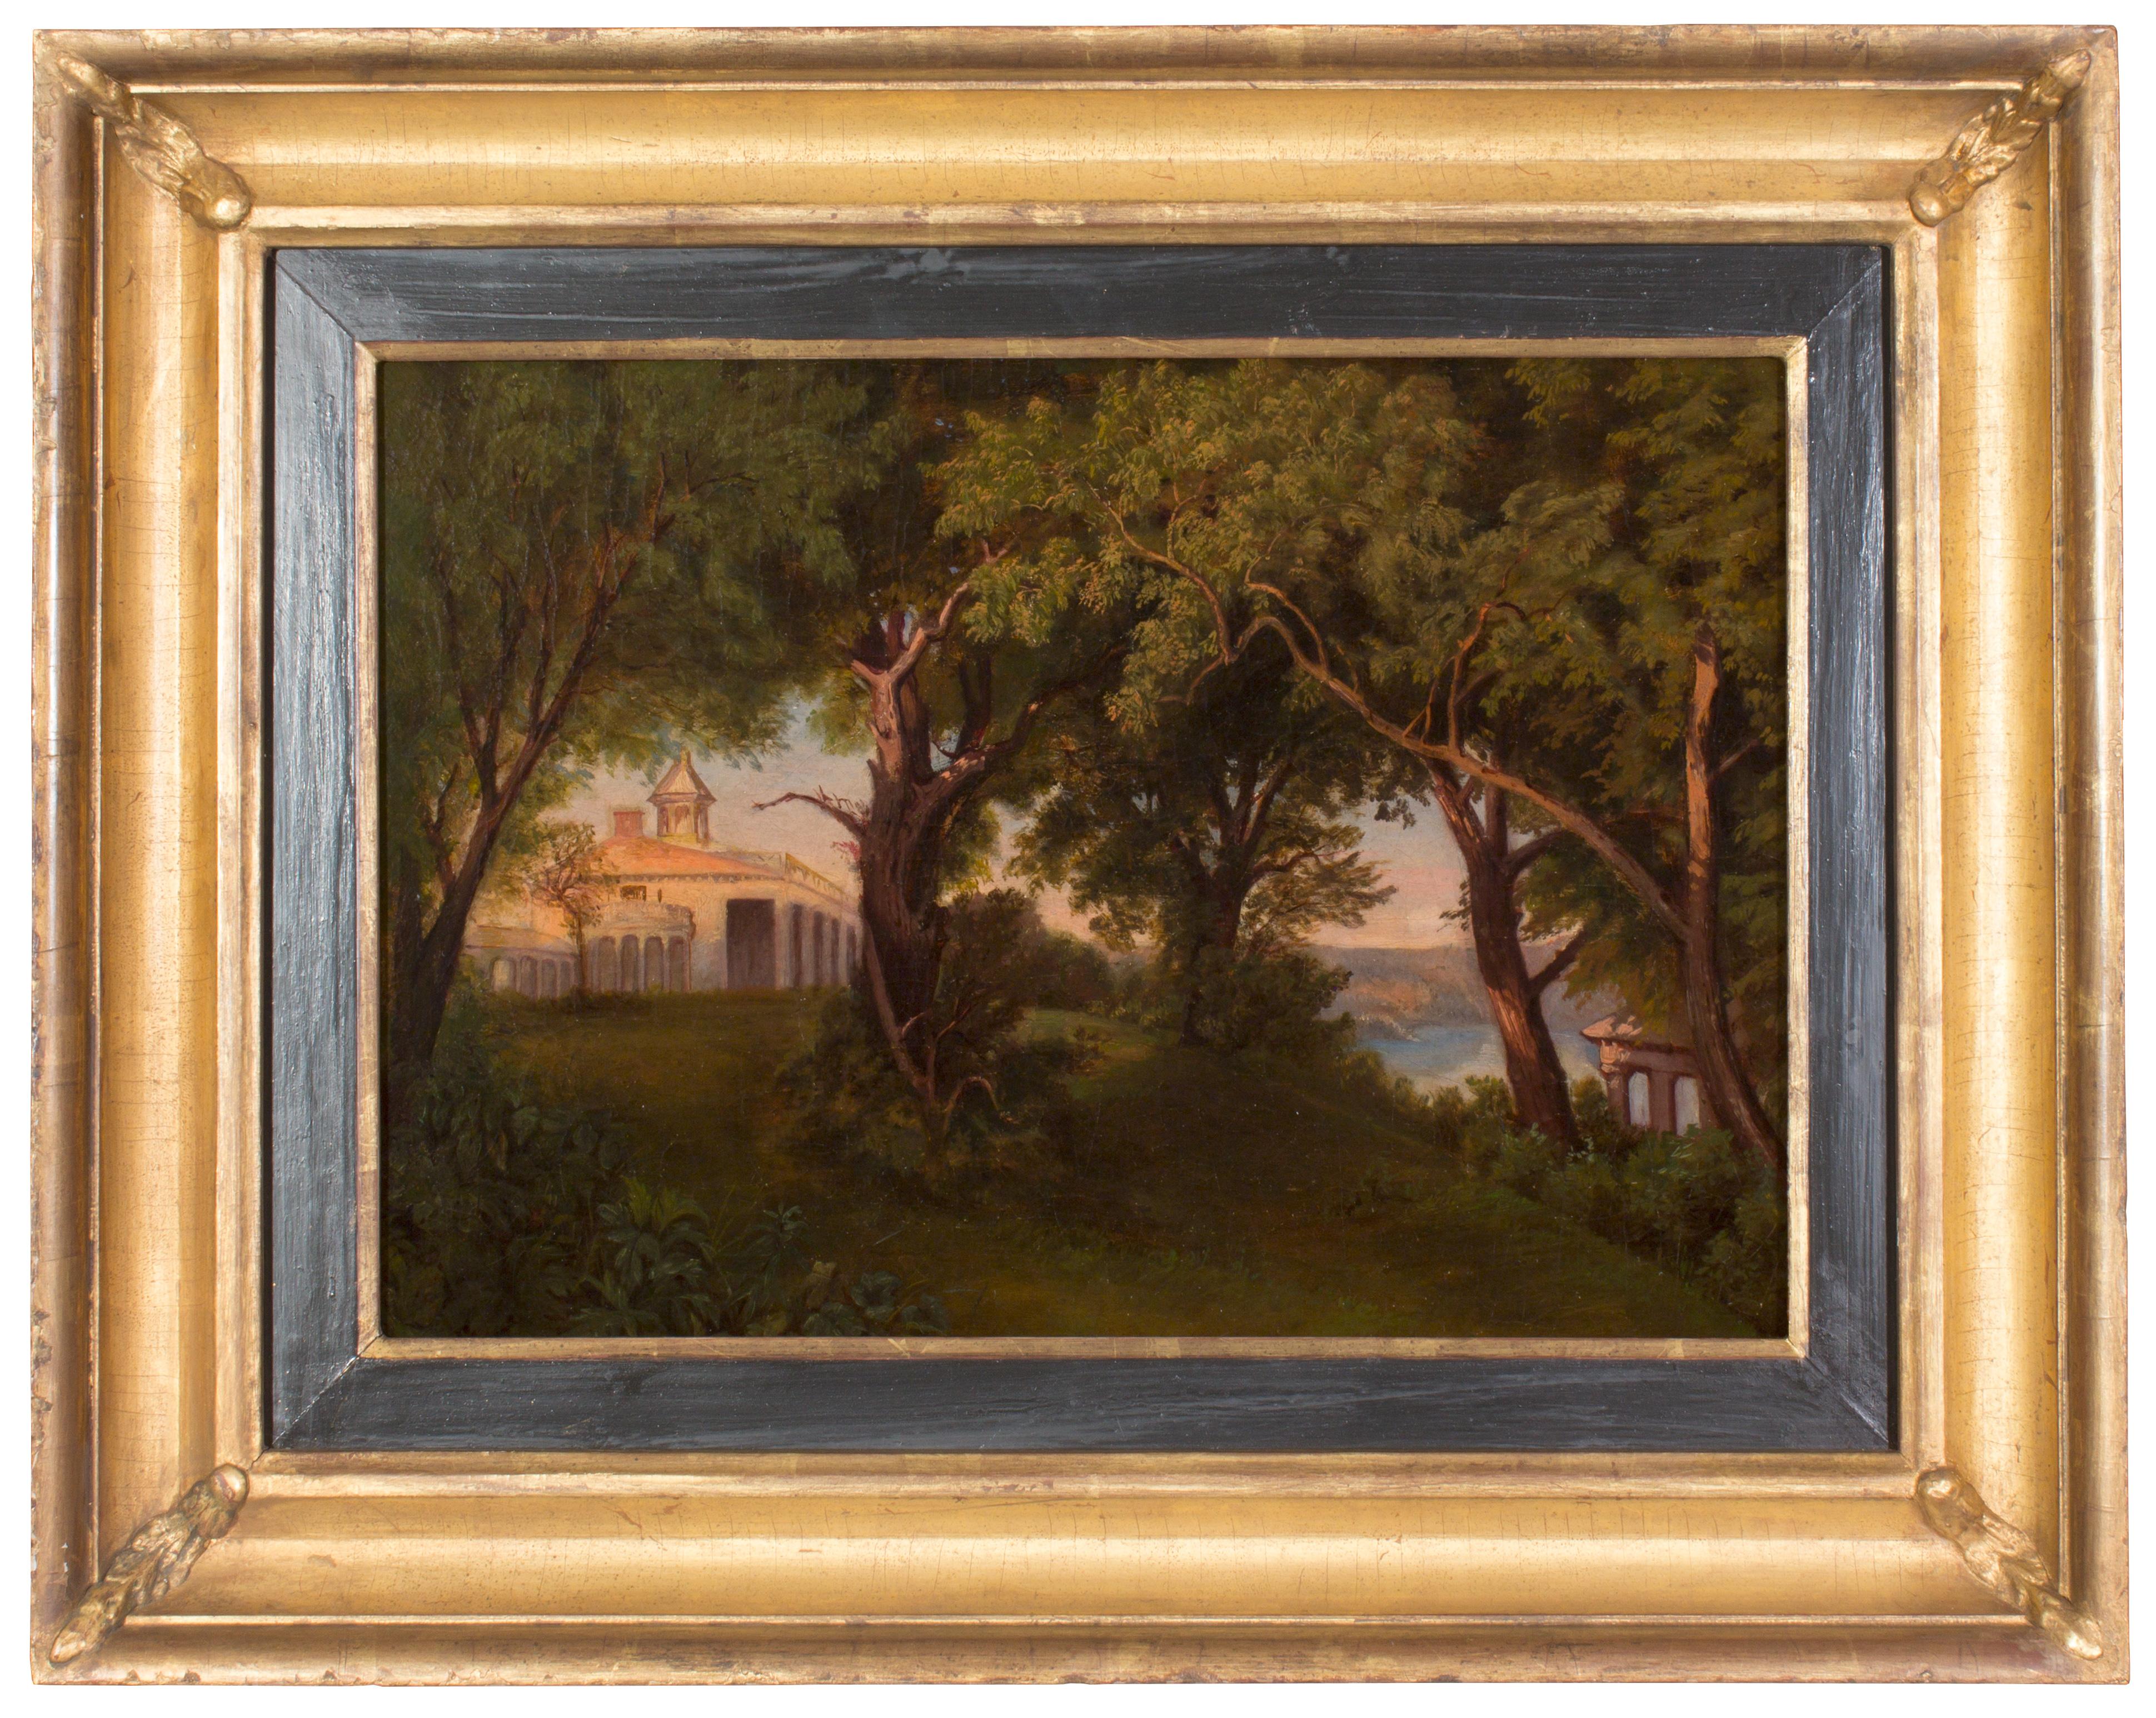 Unknown Landscape Painting - View of Mount Vernon Estate, the historic home of George and Martha Washington